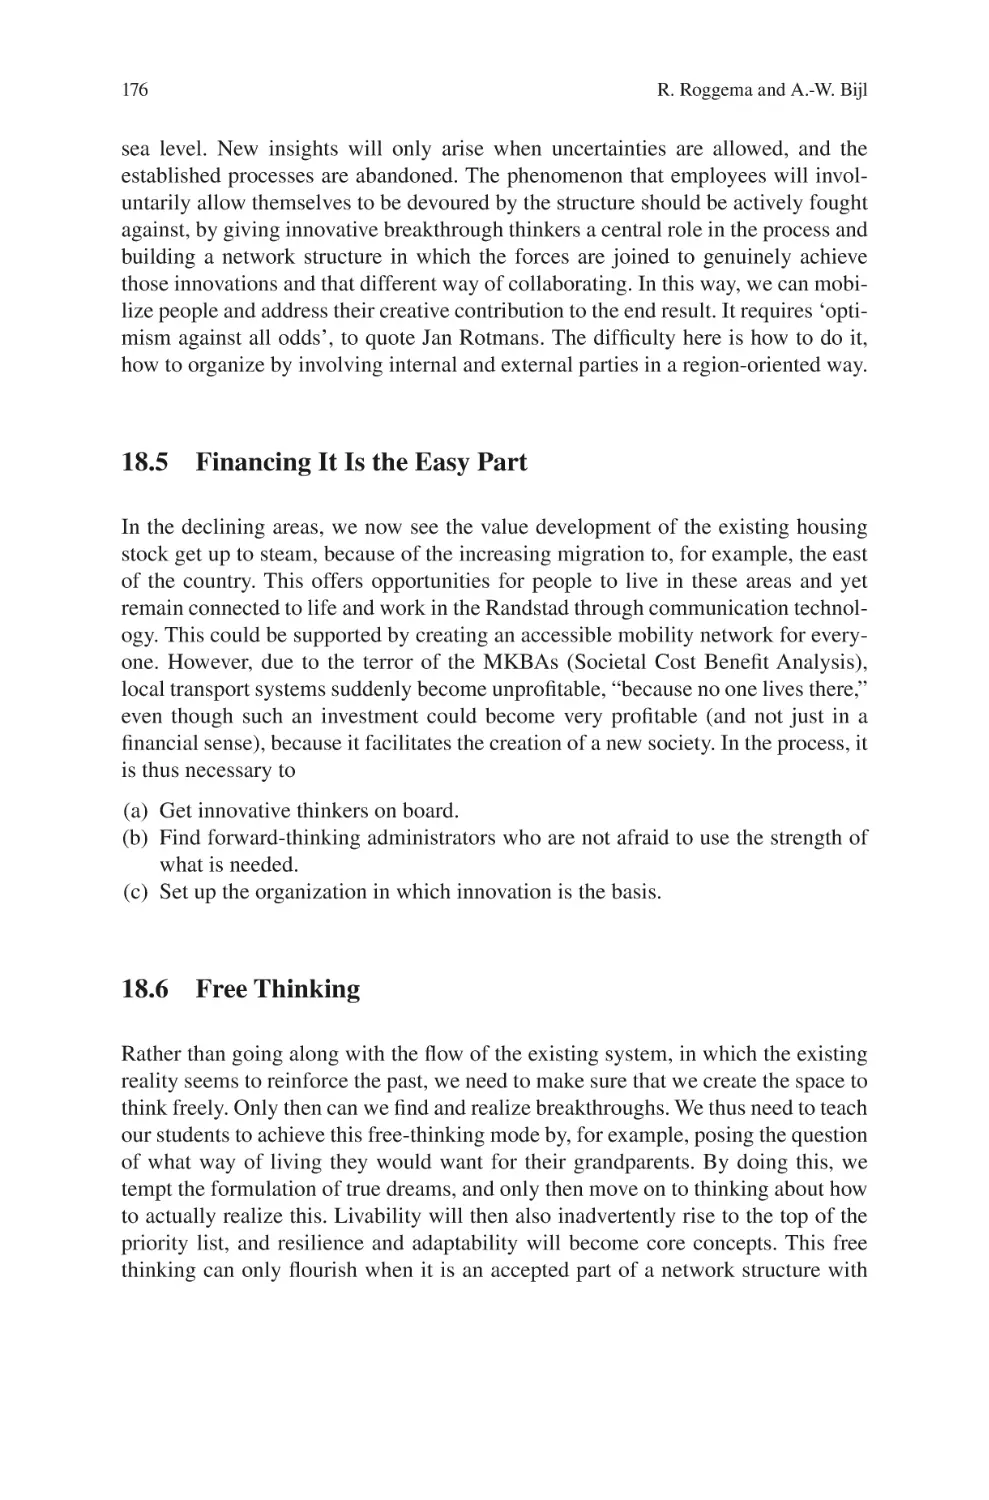 18.5 Financing It Is the Easy Part
18.6 Free Thinking